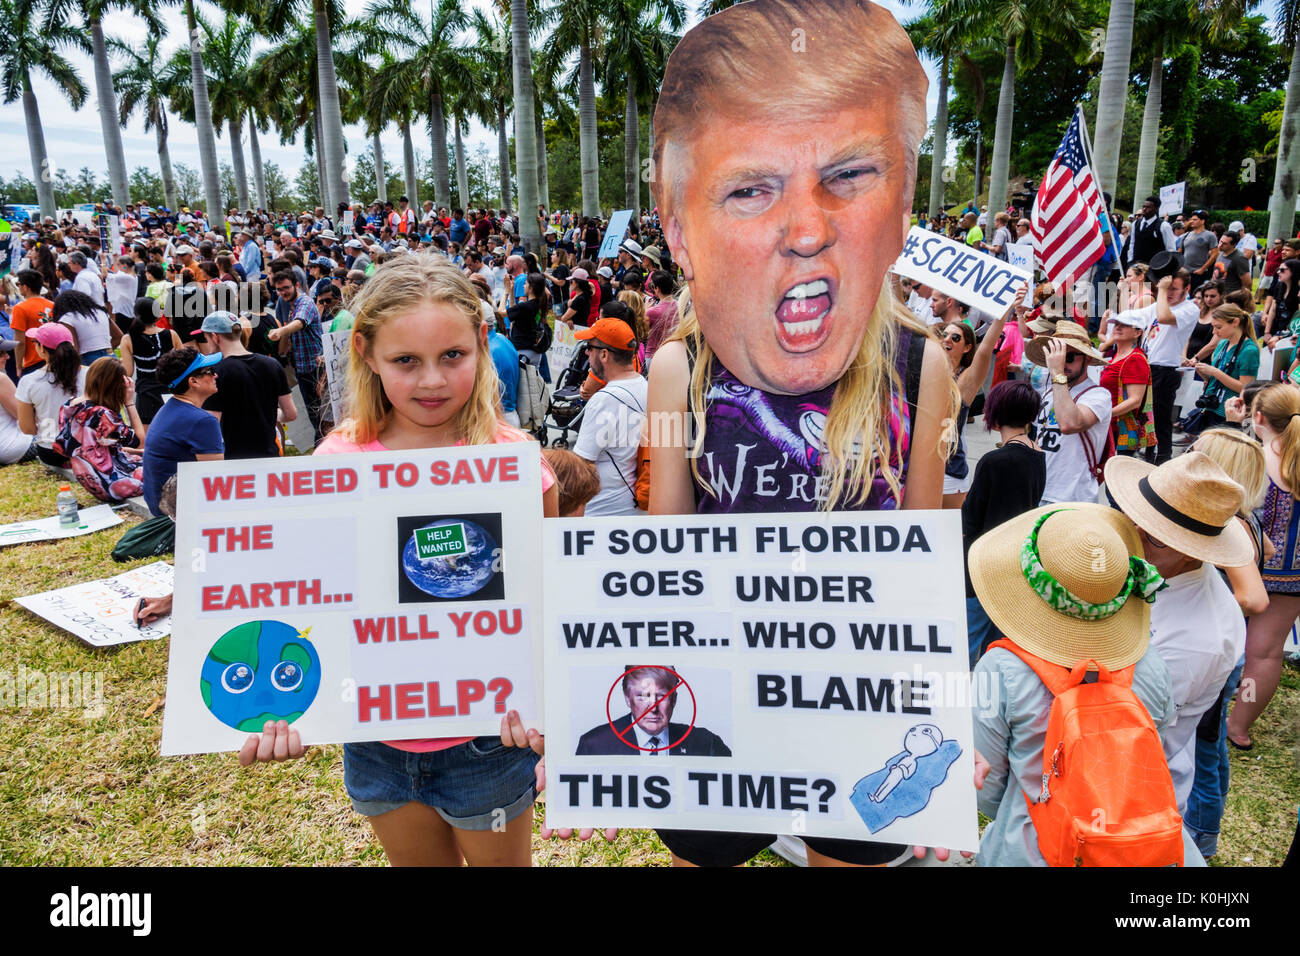 Miami Florida,Museum Park,March for Science,protest,rally,sign,poster,protester,girl girls,female kid kids child children youngster,student students p Stock Photo